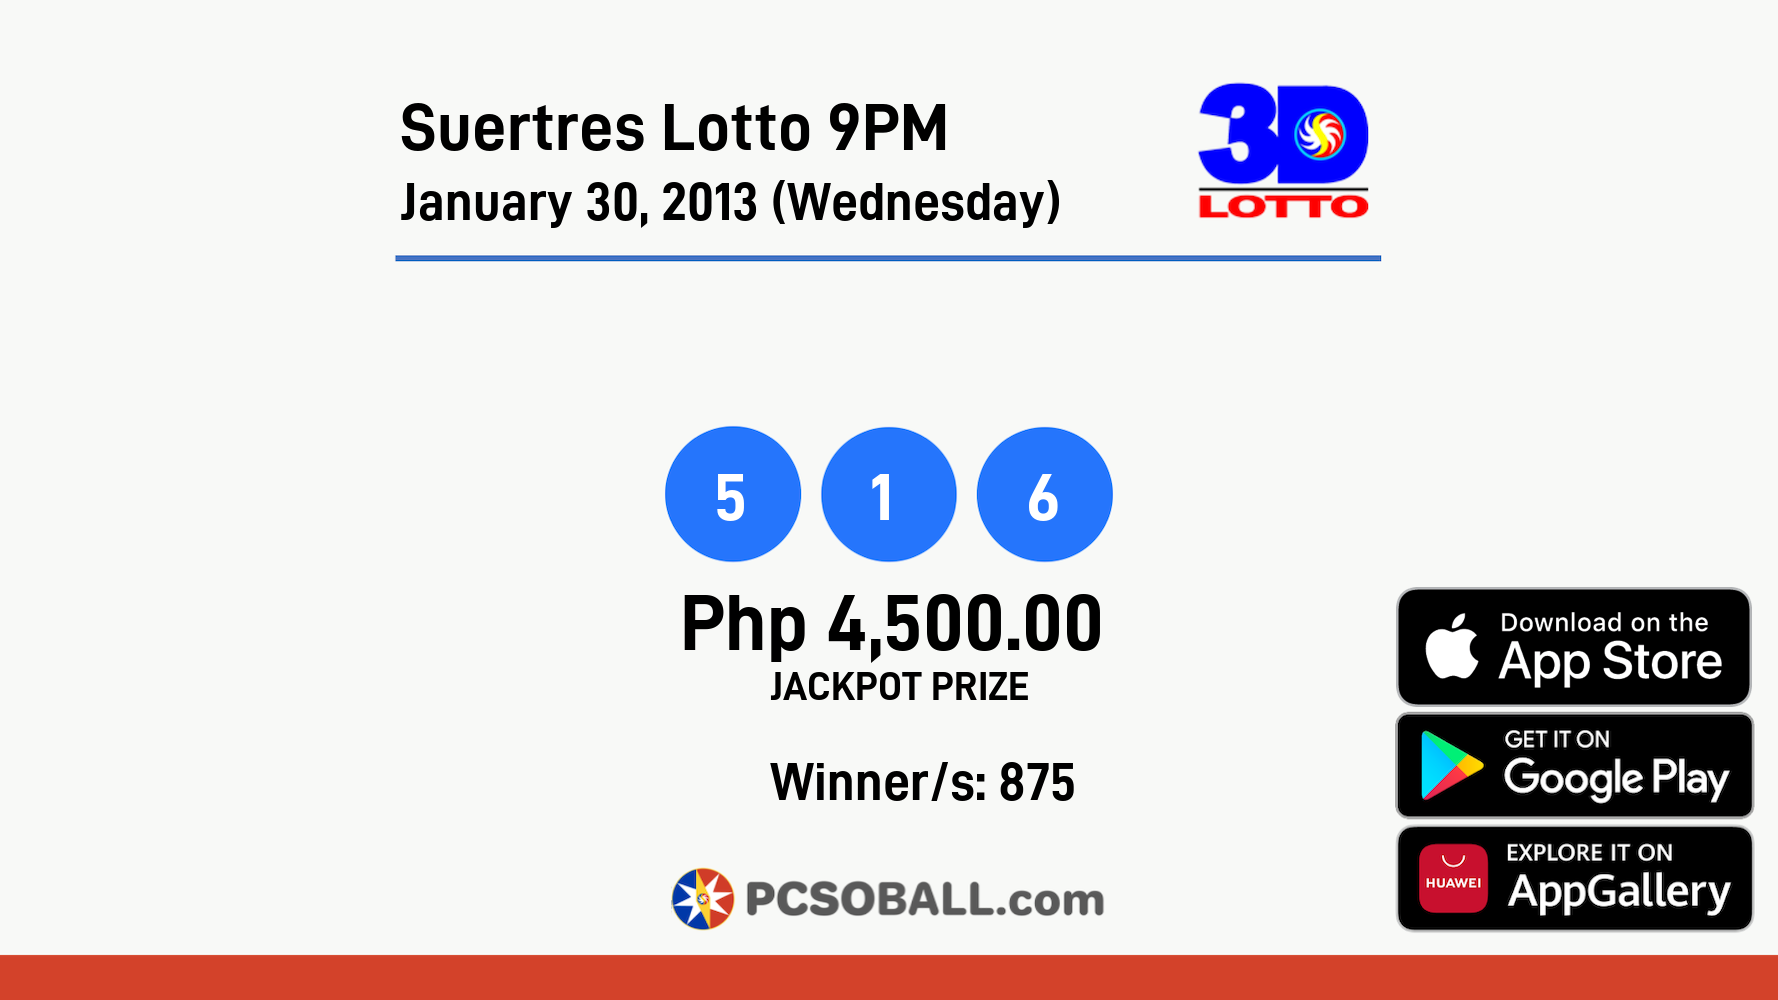 Suertres Lotto 9PM January 30, 2013 (Wednesday) Result